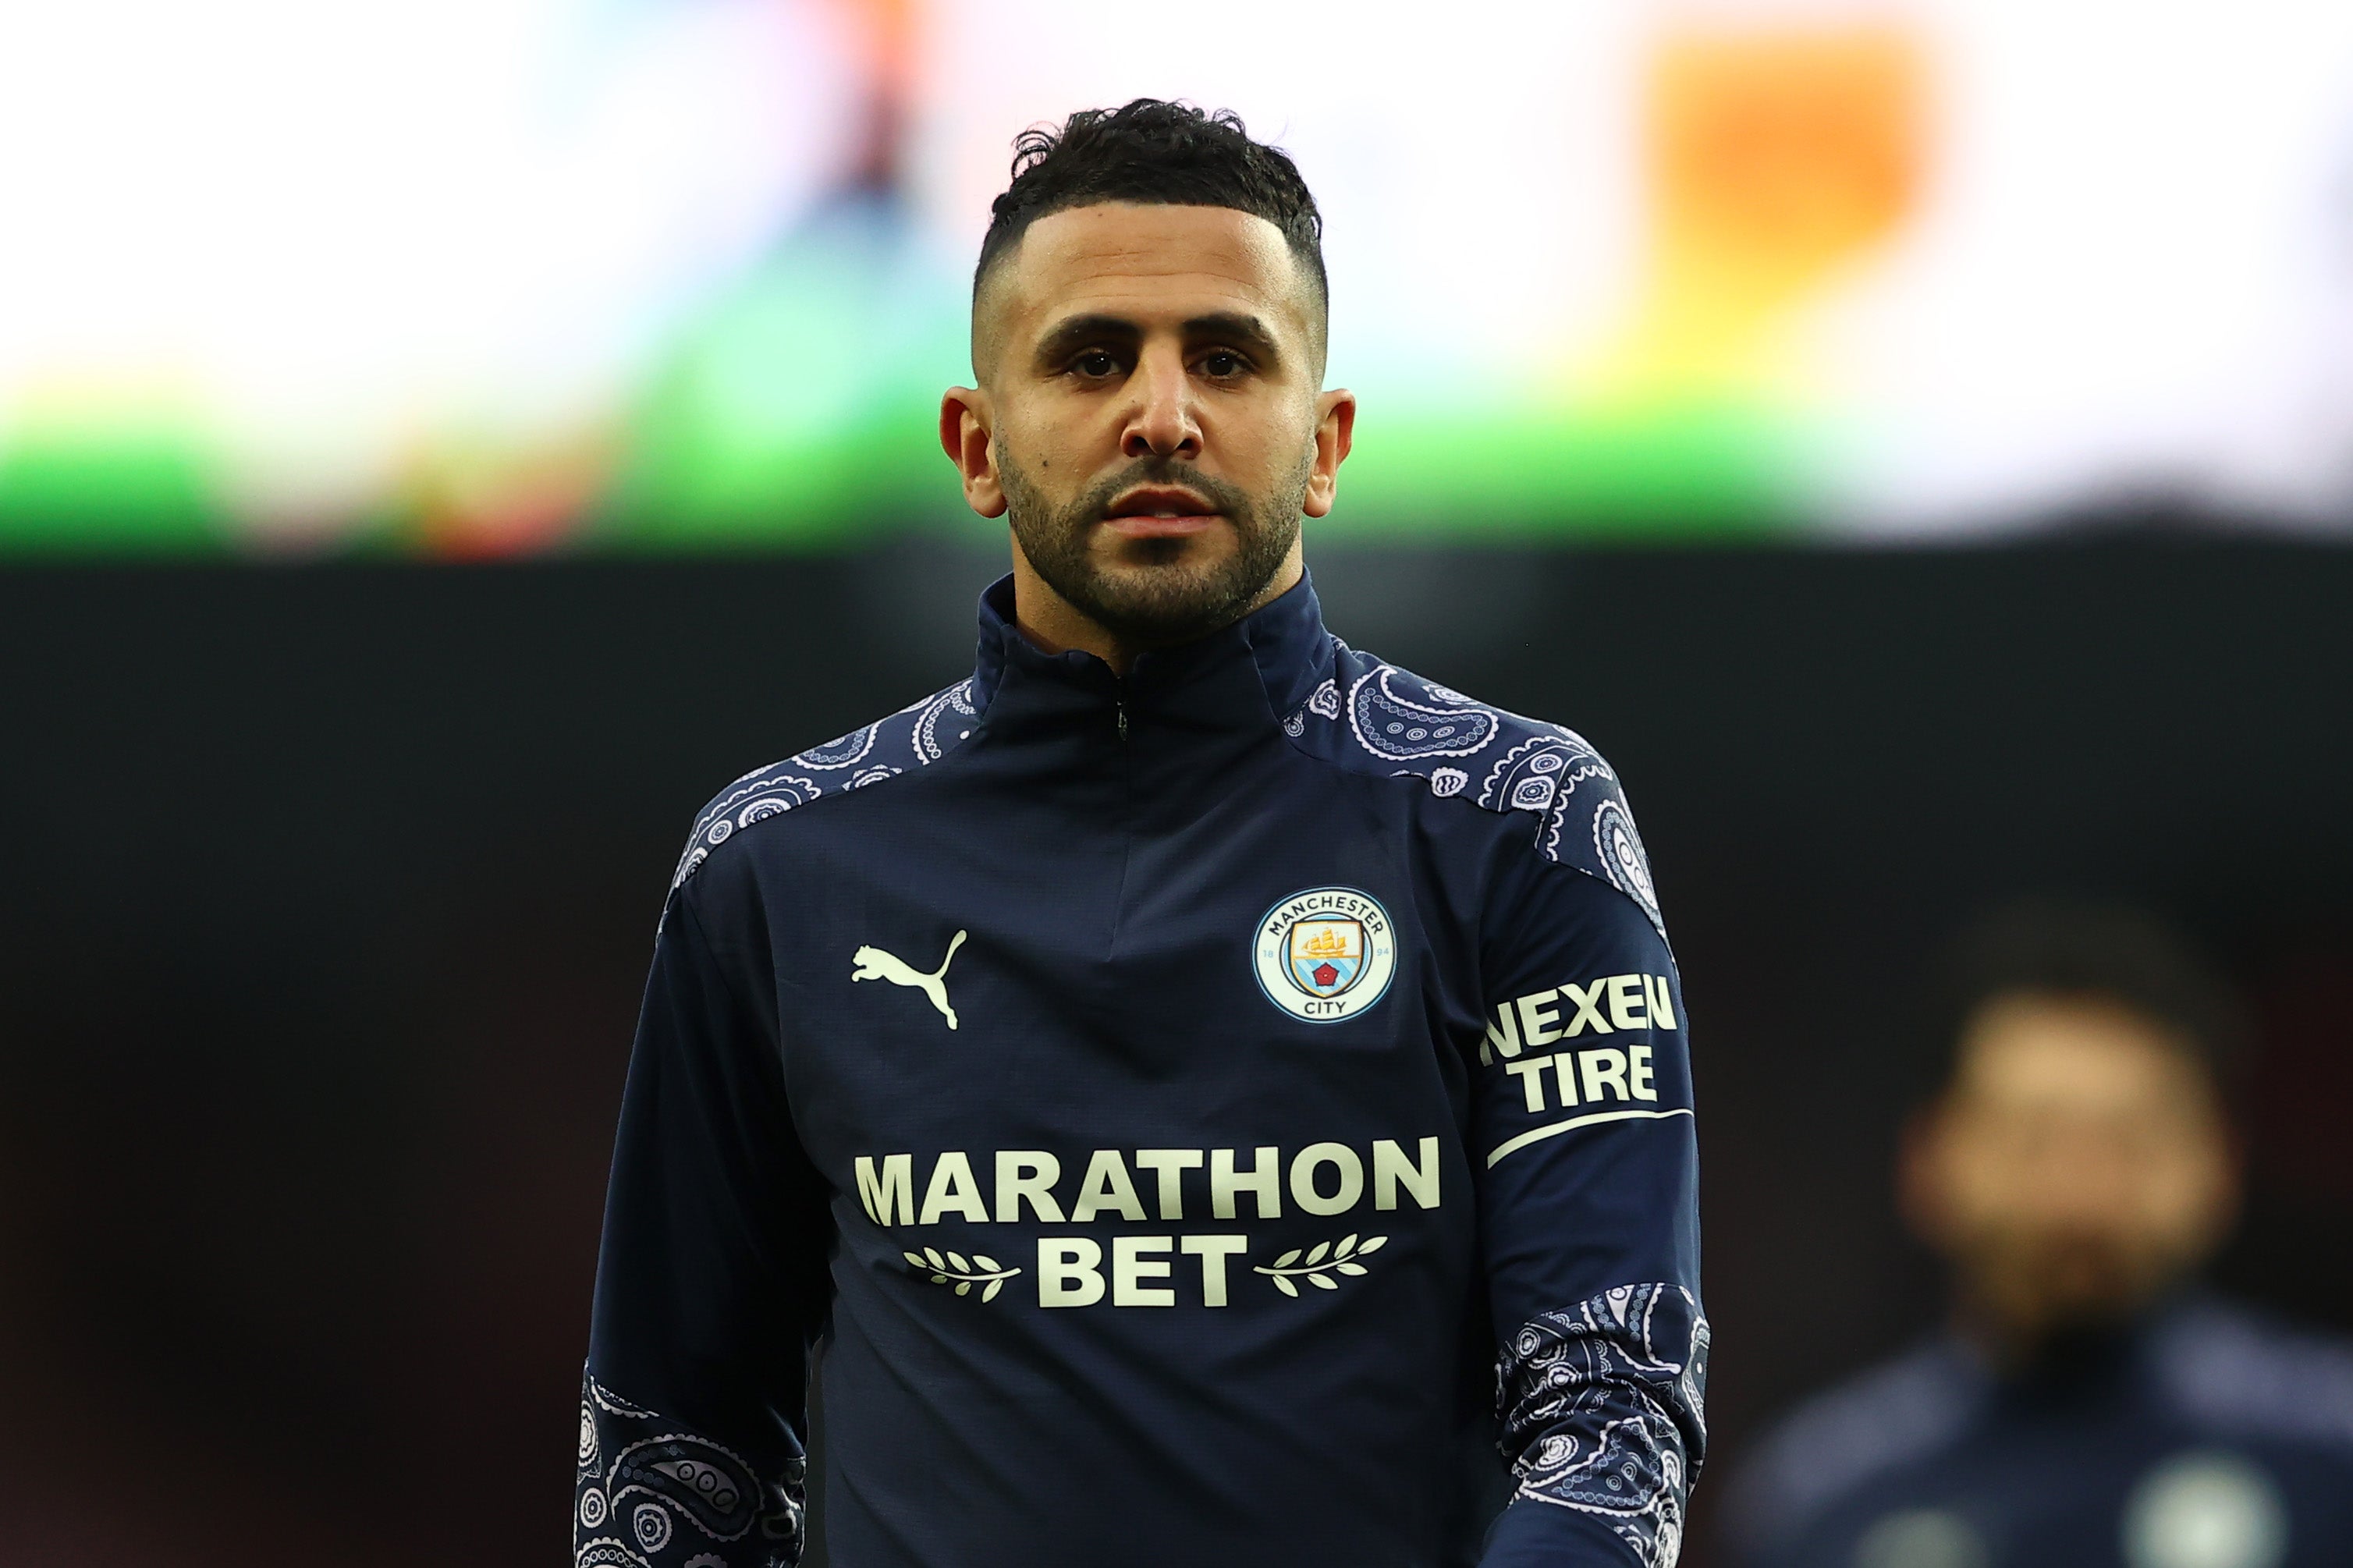 Riyad Mahrez insists last year’s loss in the Champions League quarter-finals was the biggest disappointment of his career